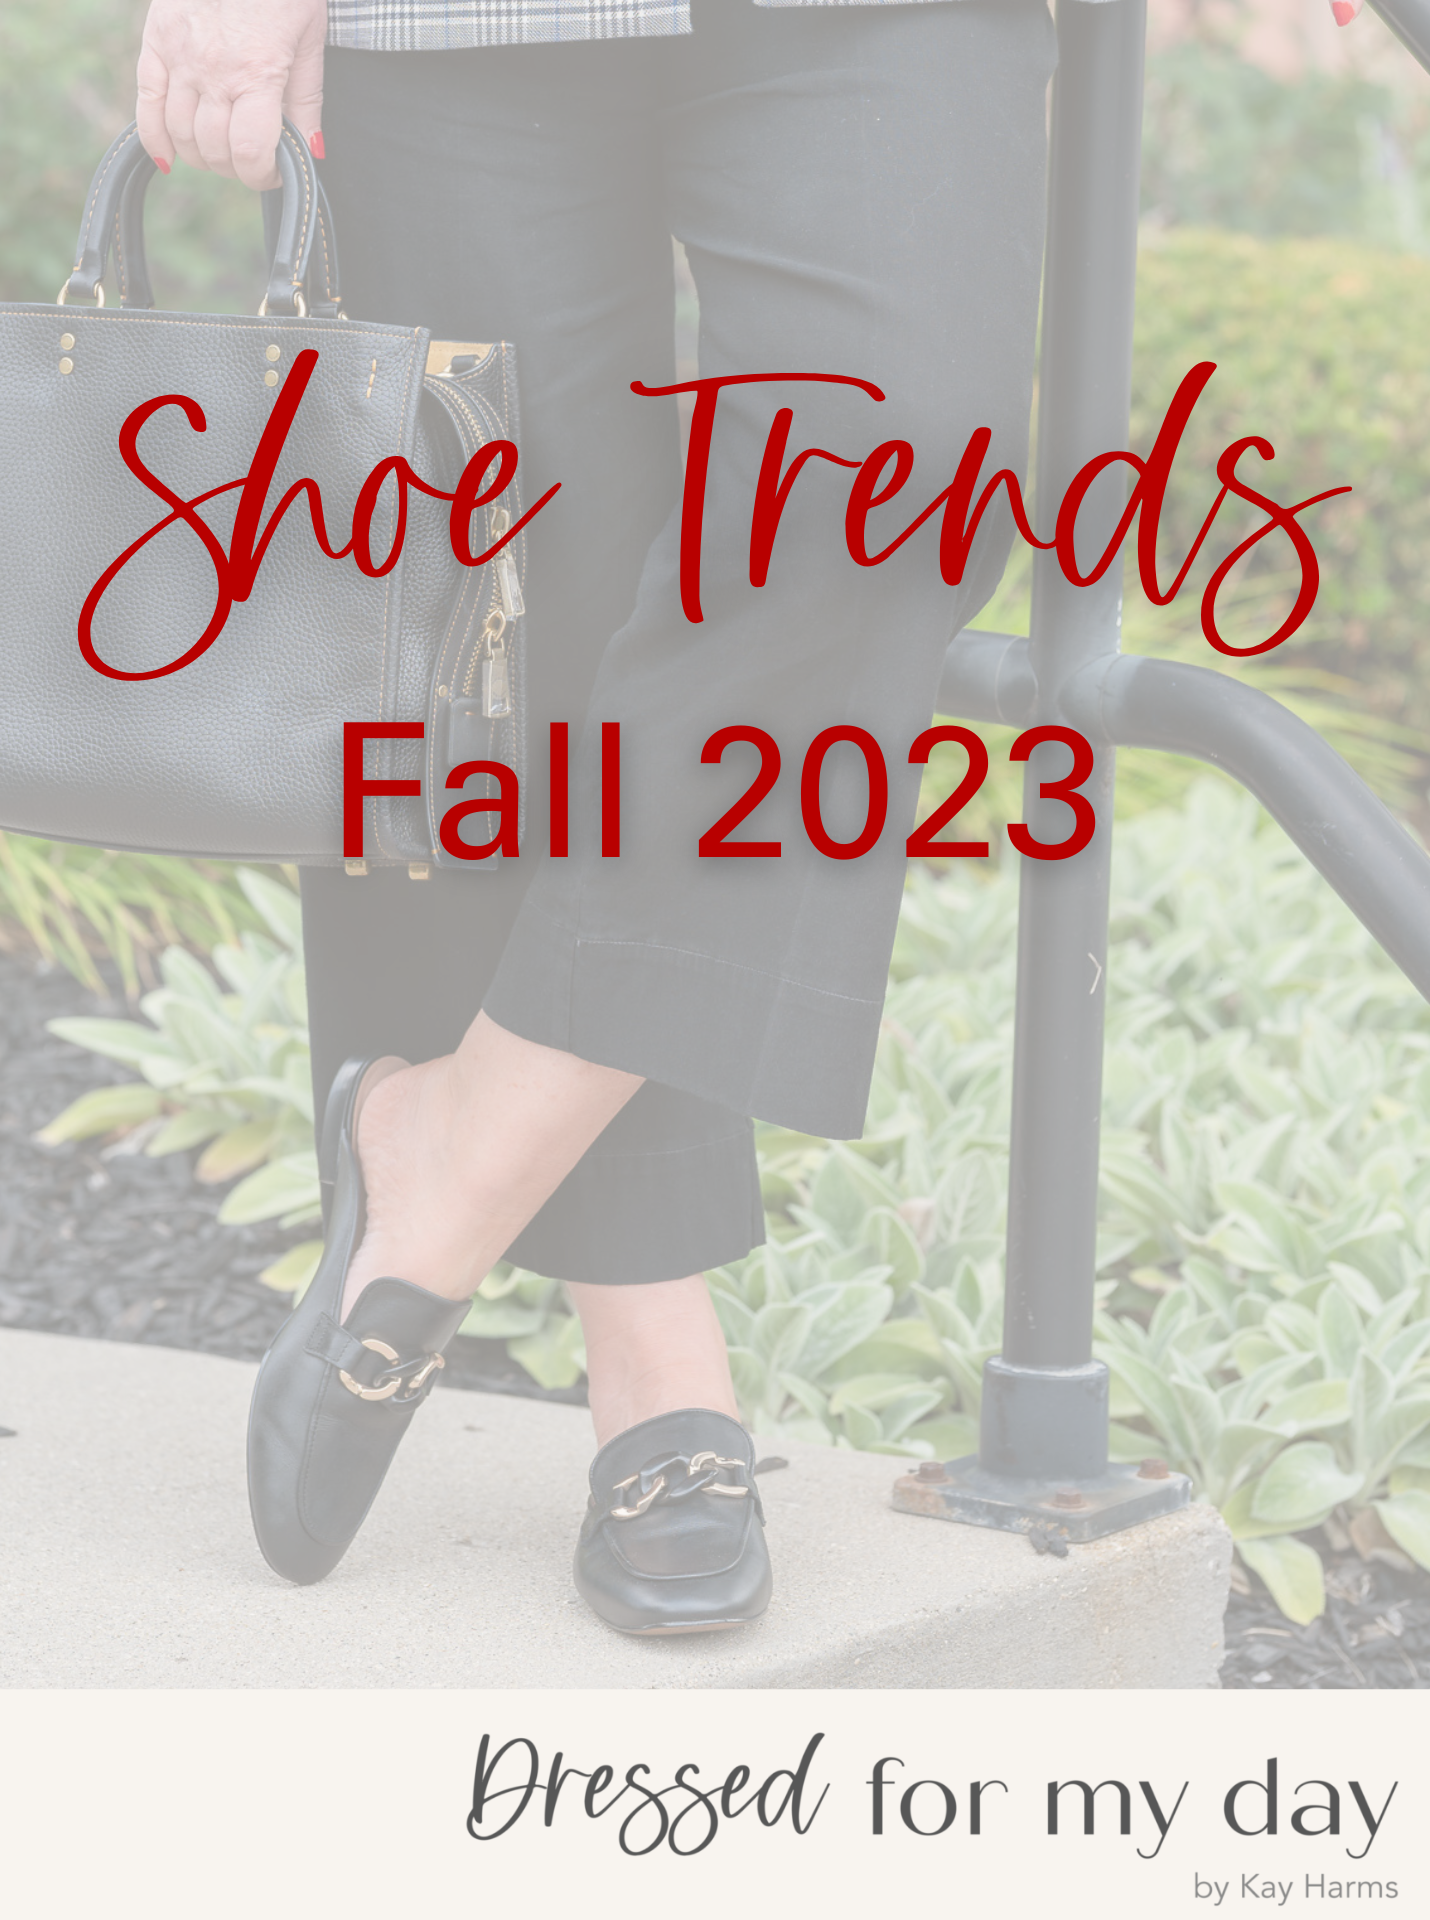 Fall Shoe Trends 2023 for women over 50